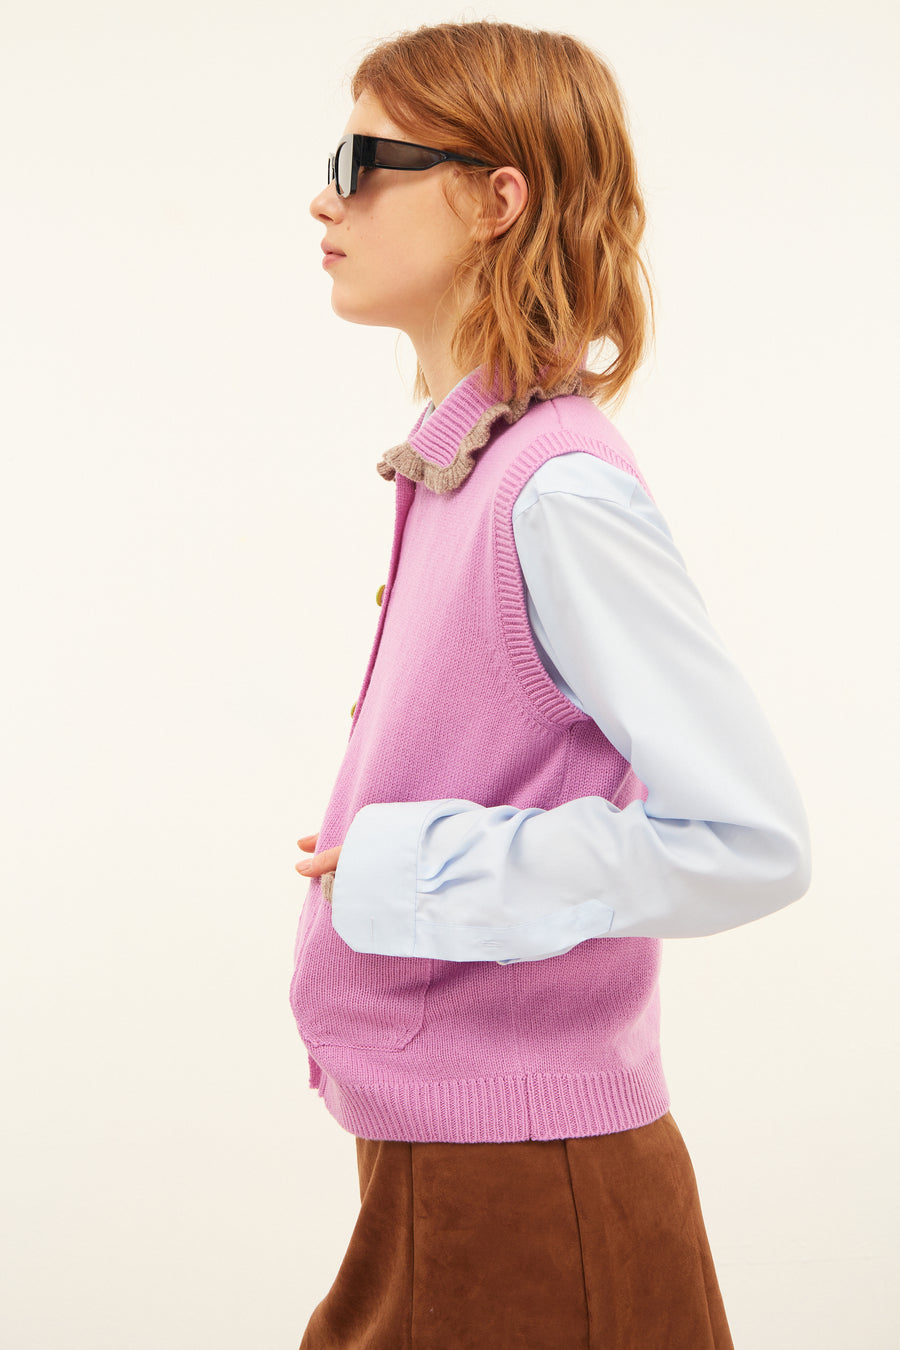 Pink sleeveless sweater with collar